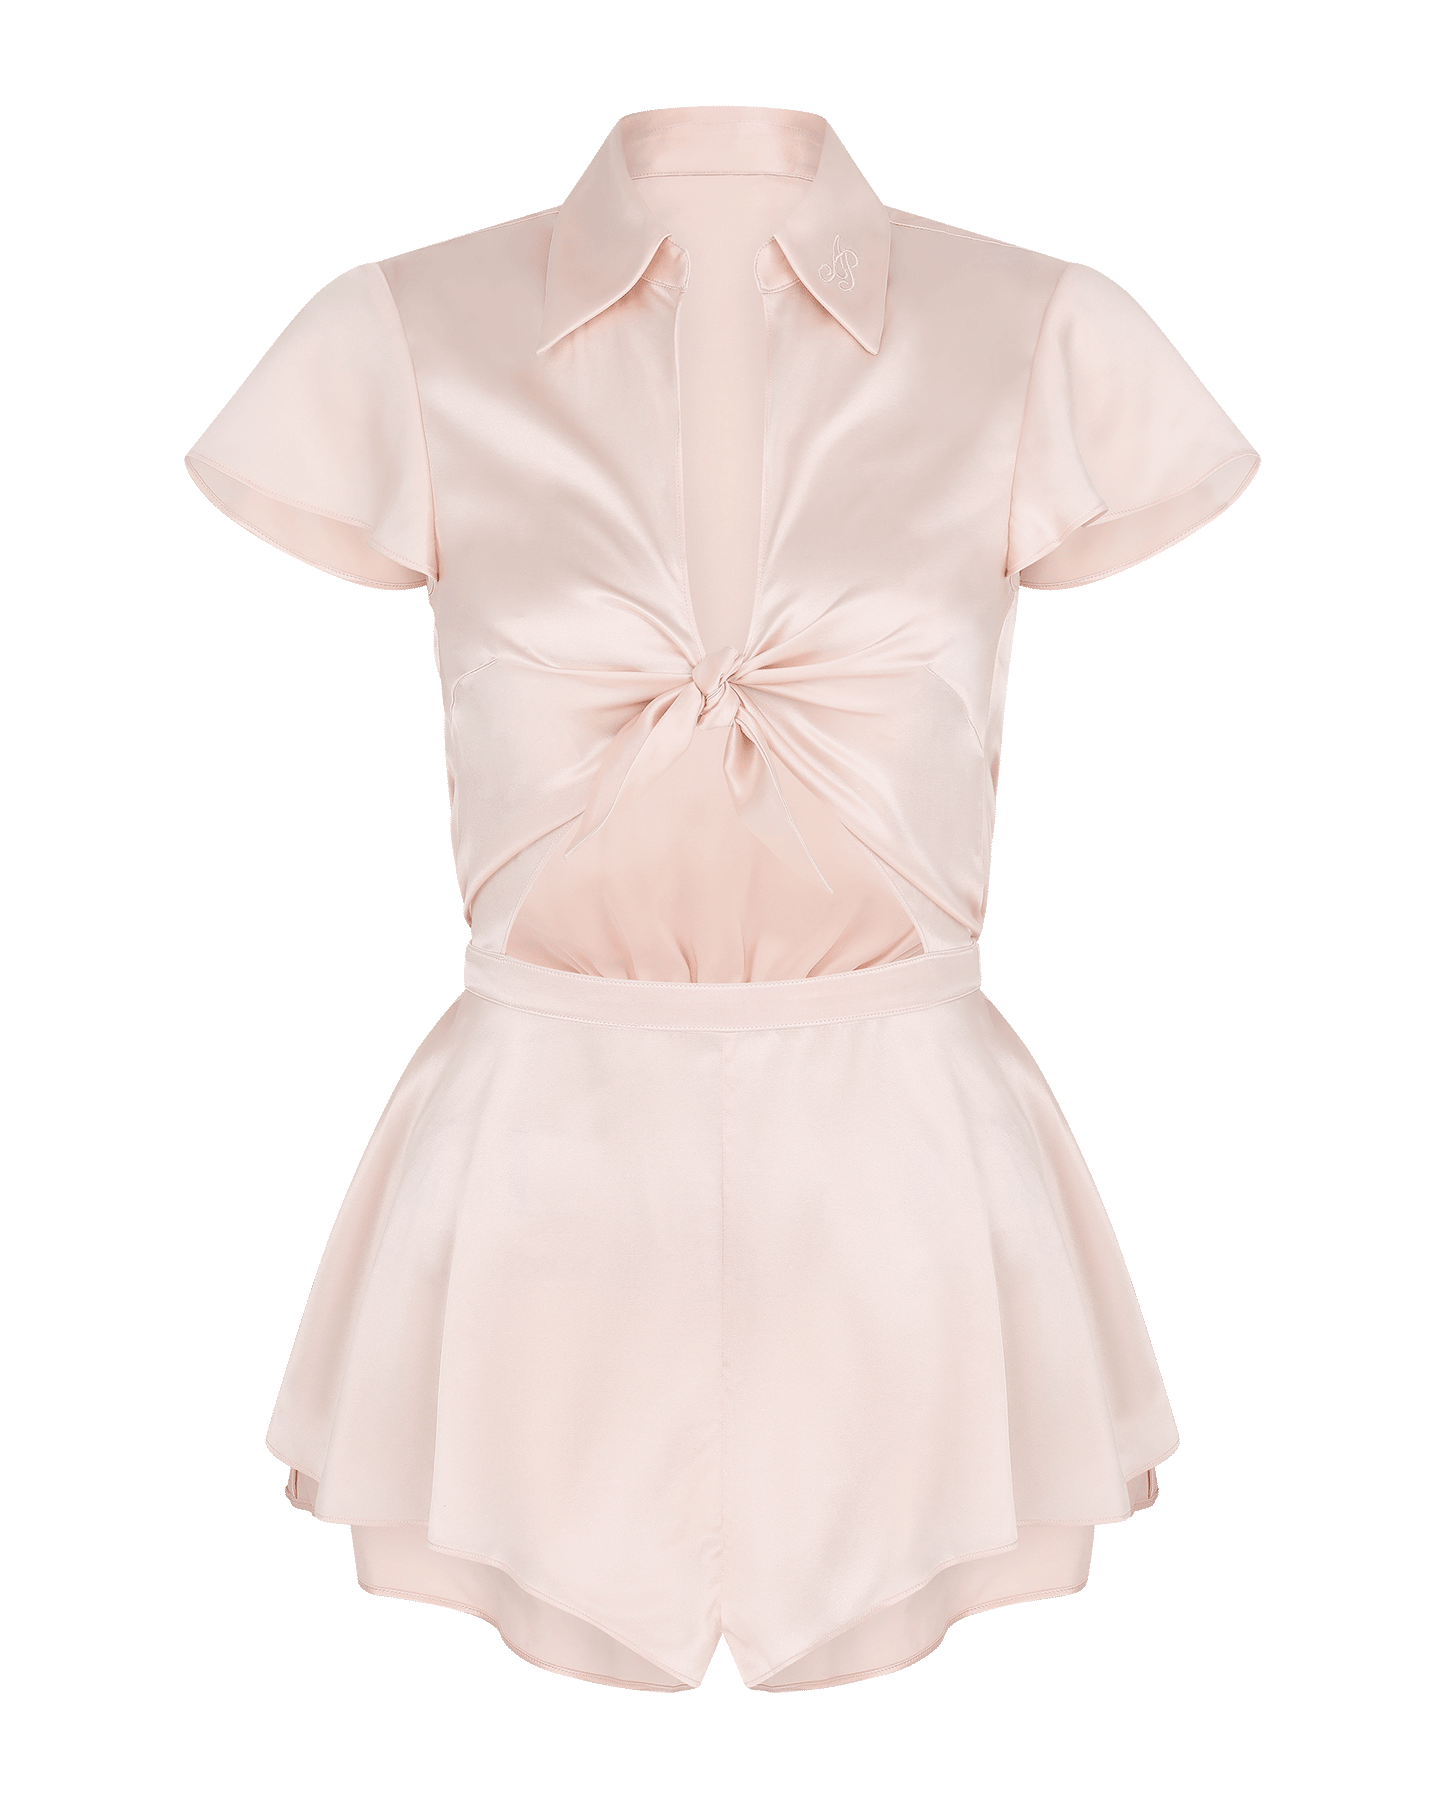 Princey Teddy in Baby Pink  By Agent Provocateur All Nightwear